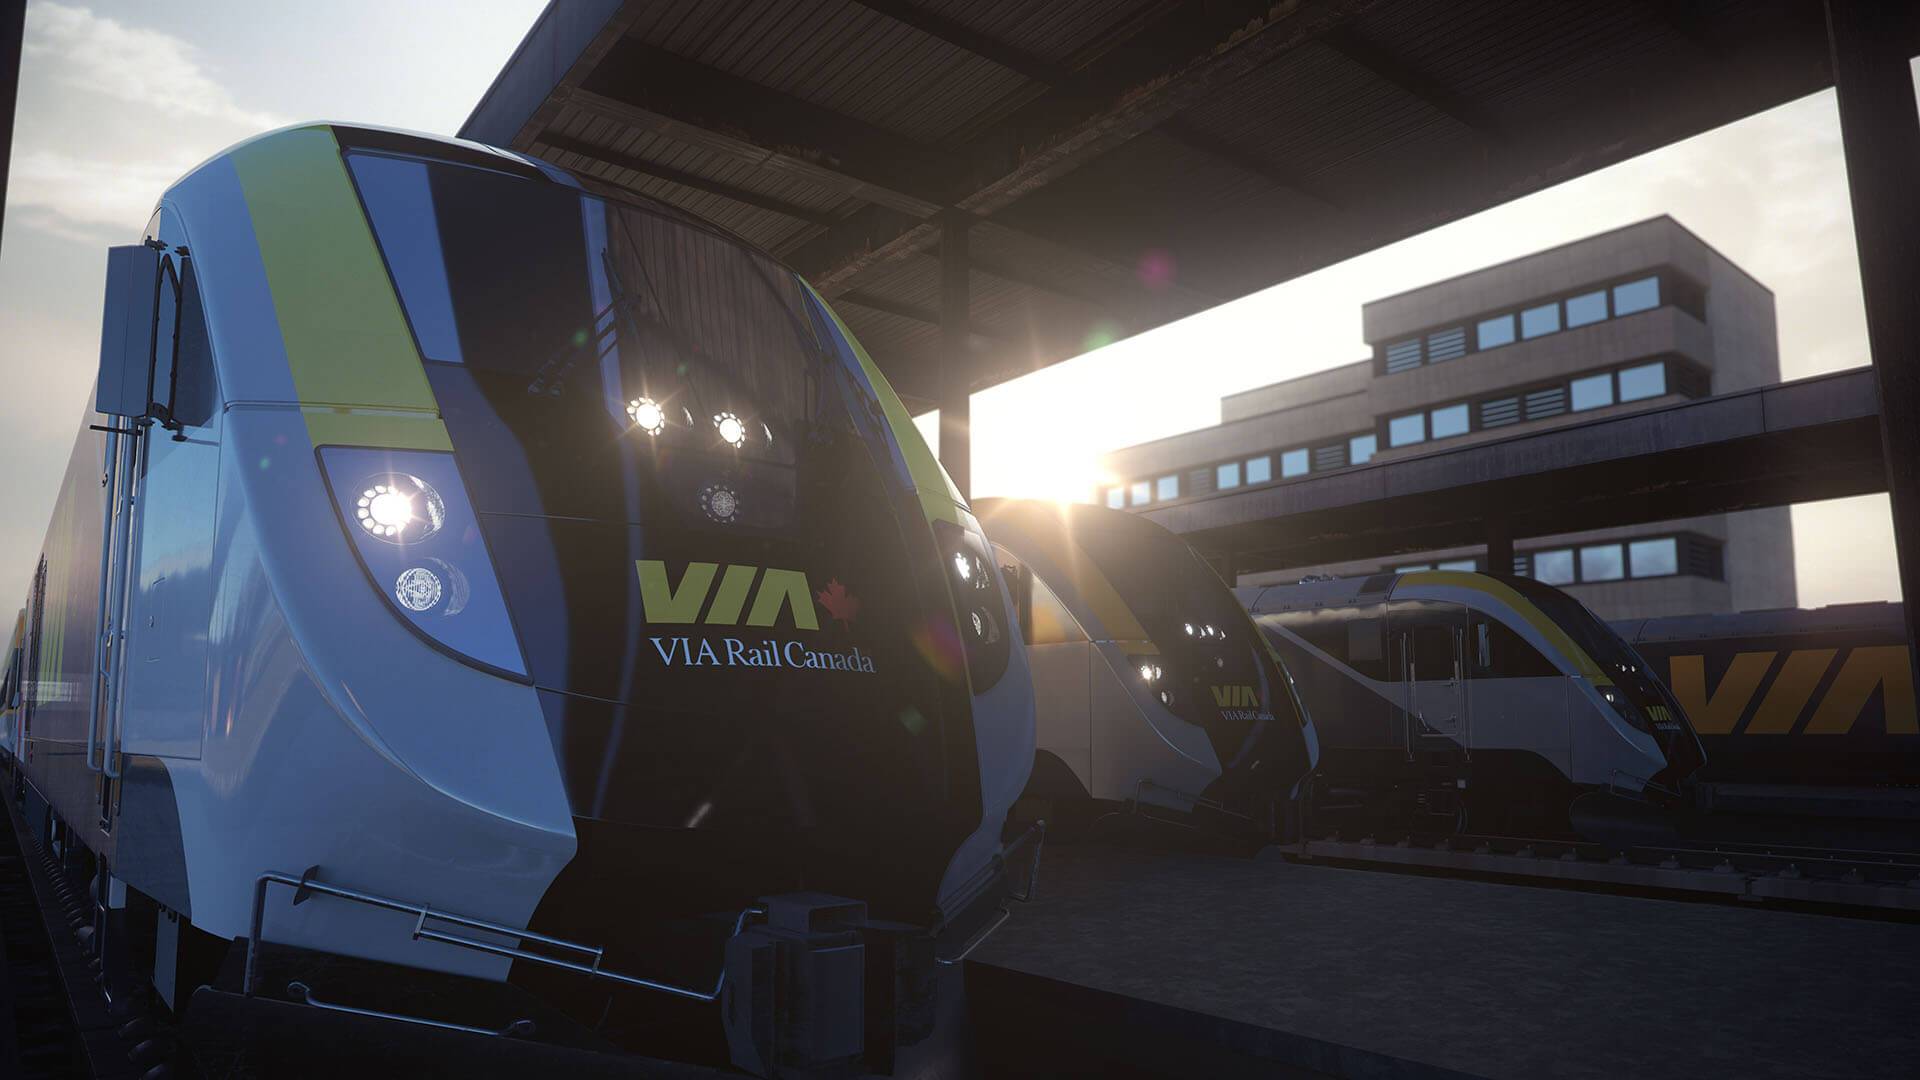 The front of the VIA new fleet locomotive shown by a station platform